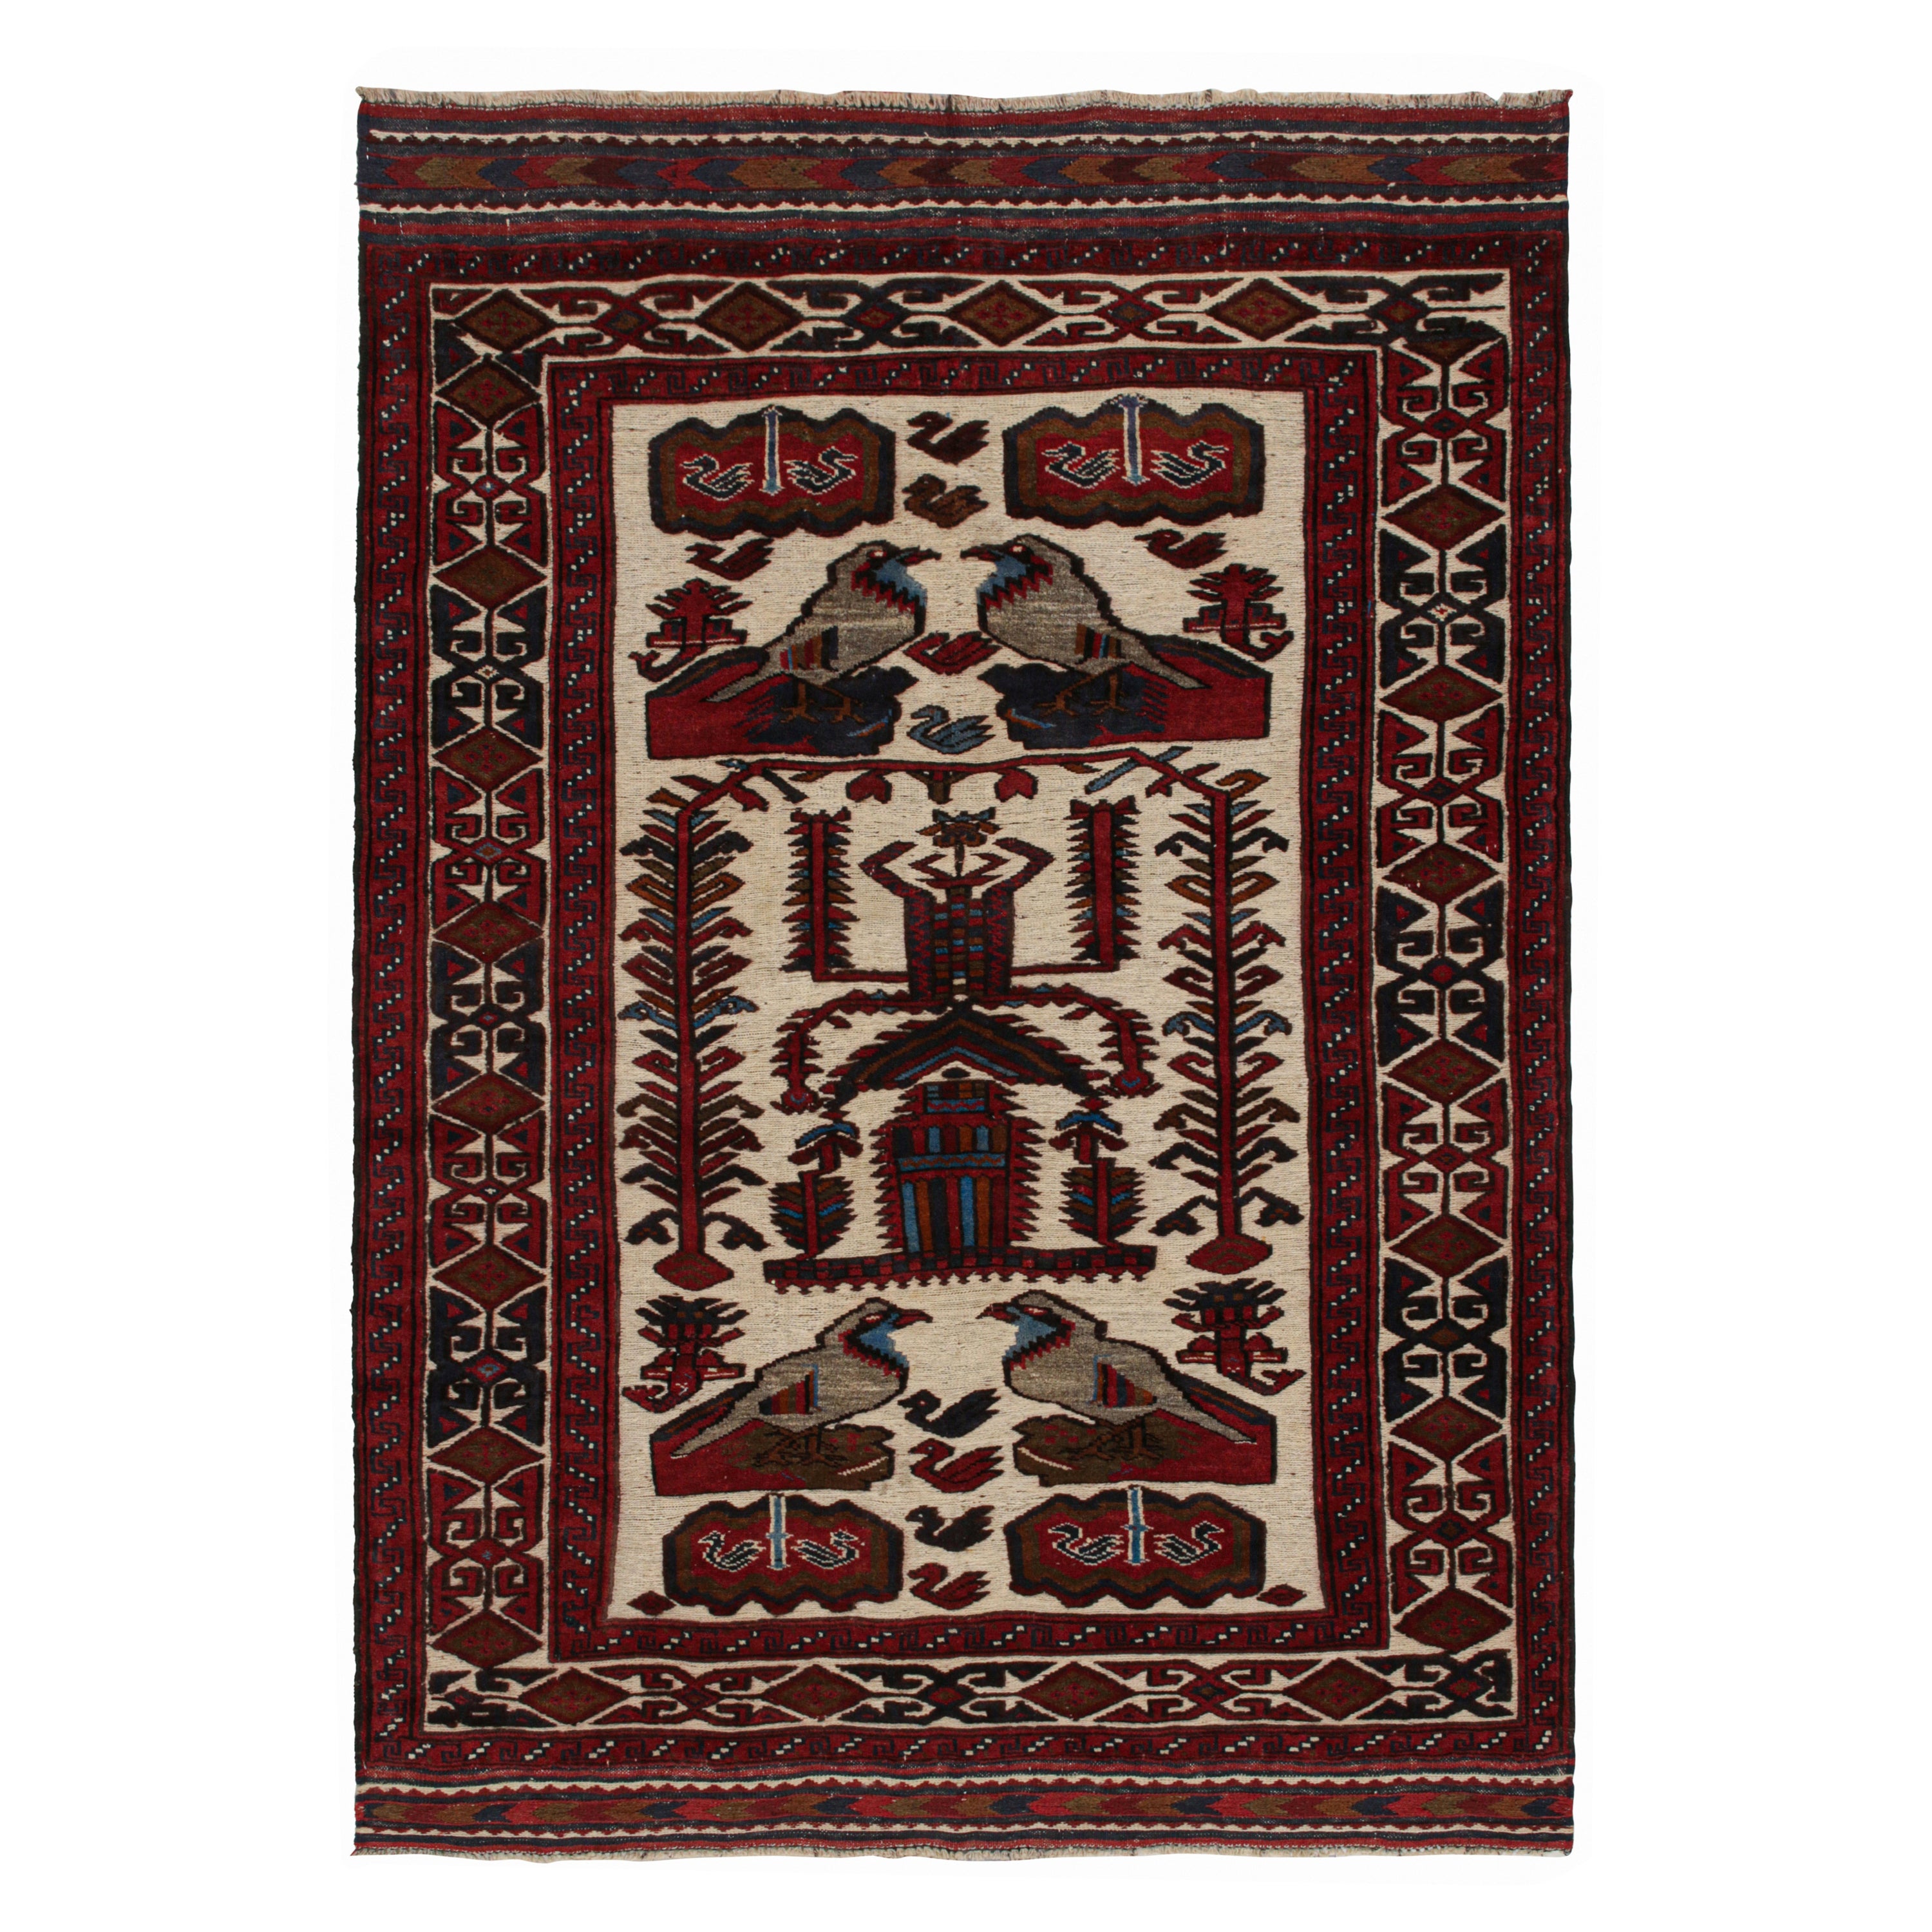 Rug & Kilim’s Persian Barjasta style rug in Beige & Red with Bird Pictorials 